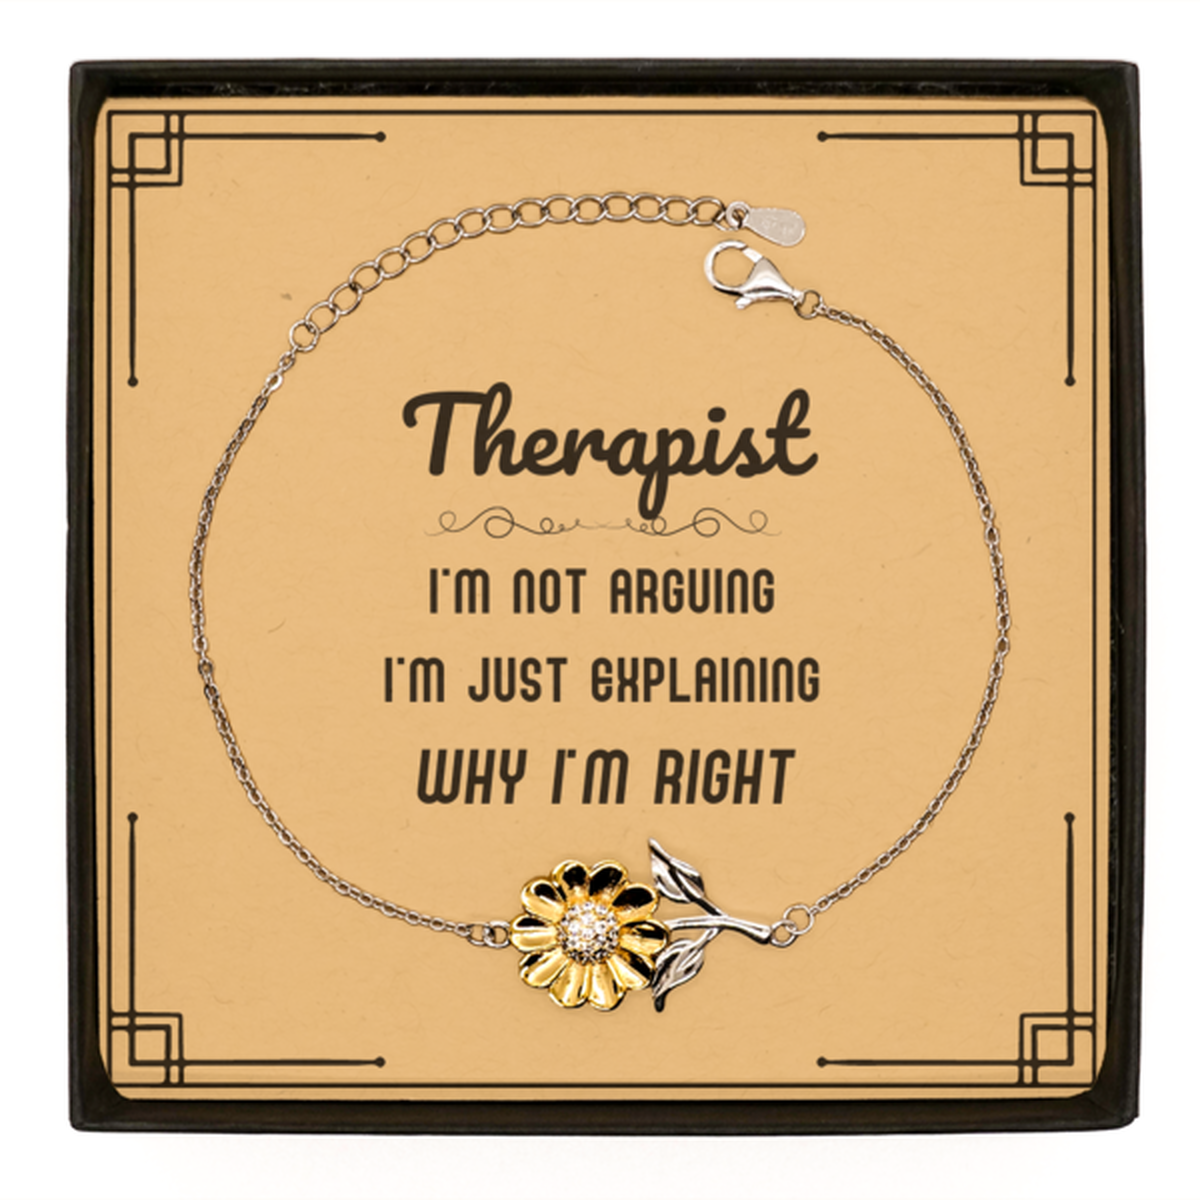 Therapist I'm not Arguing. I'm Just Explaining Why I'm RIGHT Sunflower Bracelet, Funny Saying Quote Therapist Gifts For Therapist Message Card Graduation Birthday Christmas Gifts for Men Women Coworker